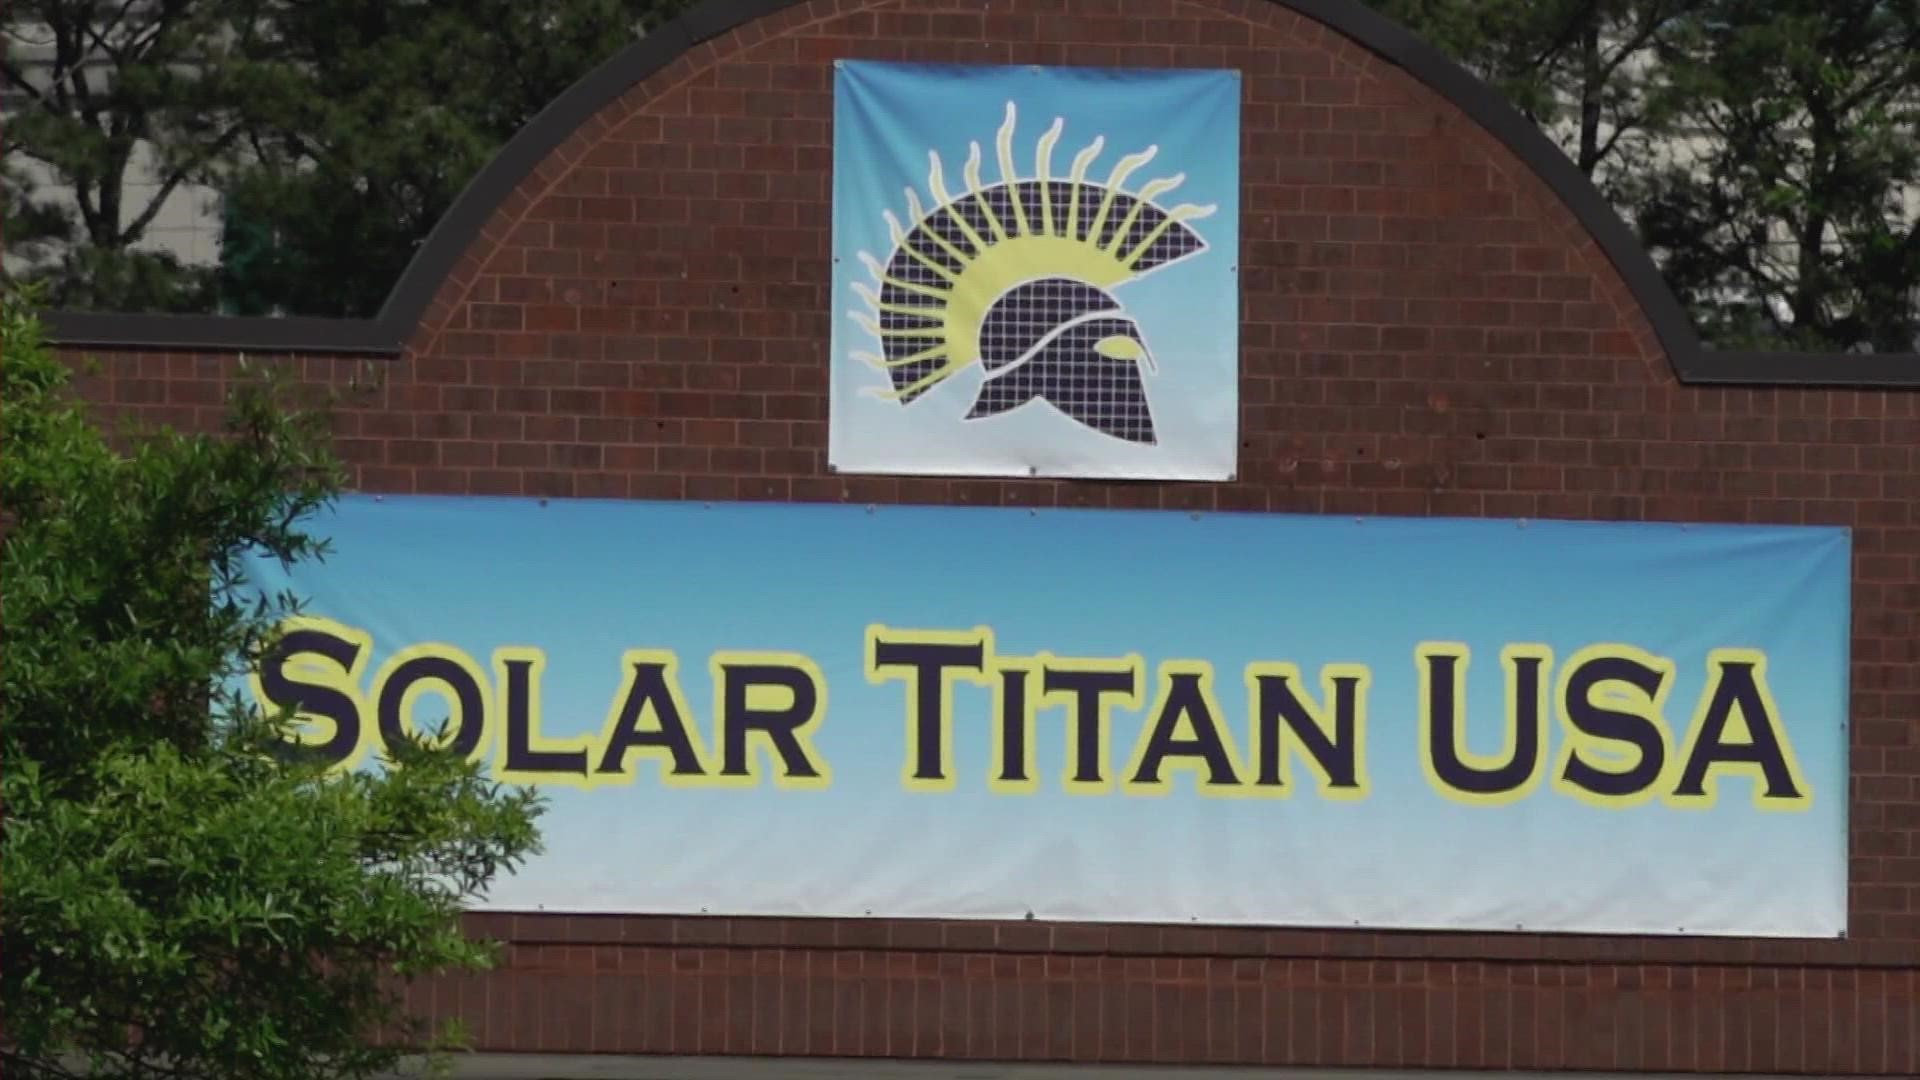 Solar Titan said it's gone from a "40,000 square foot corporate headquarters to its knees." The company blames the problems on parts from Generac.